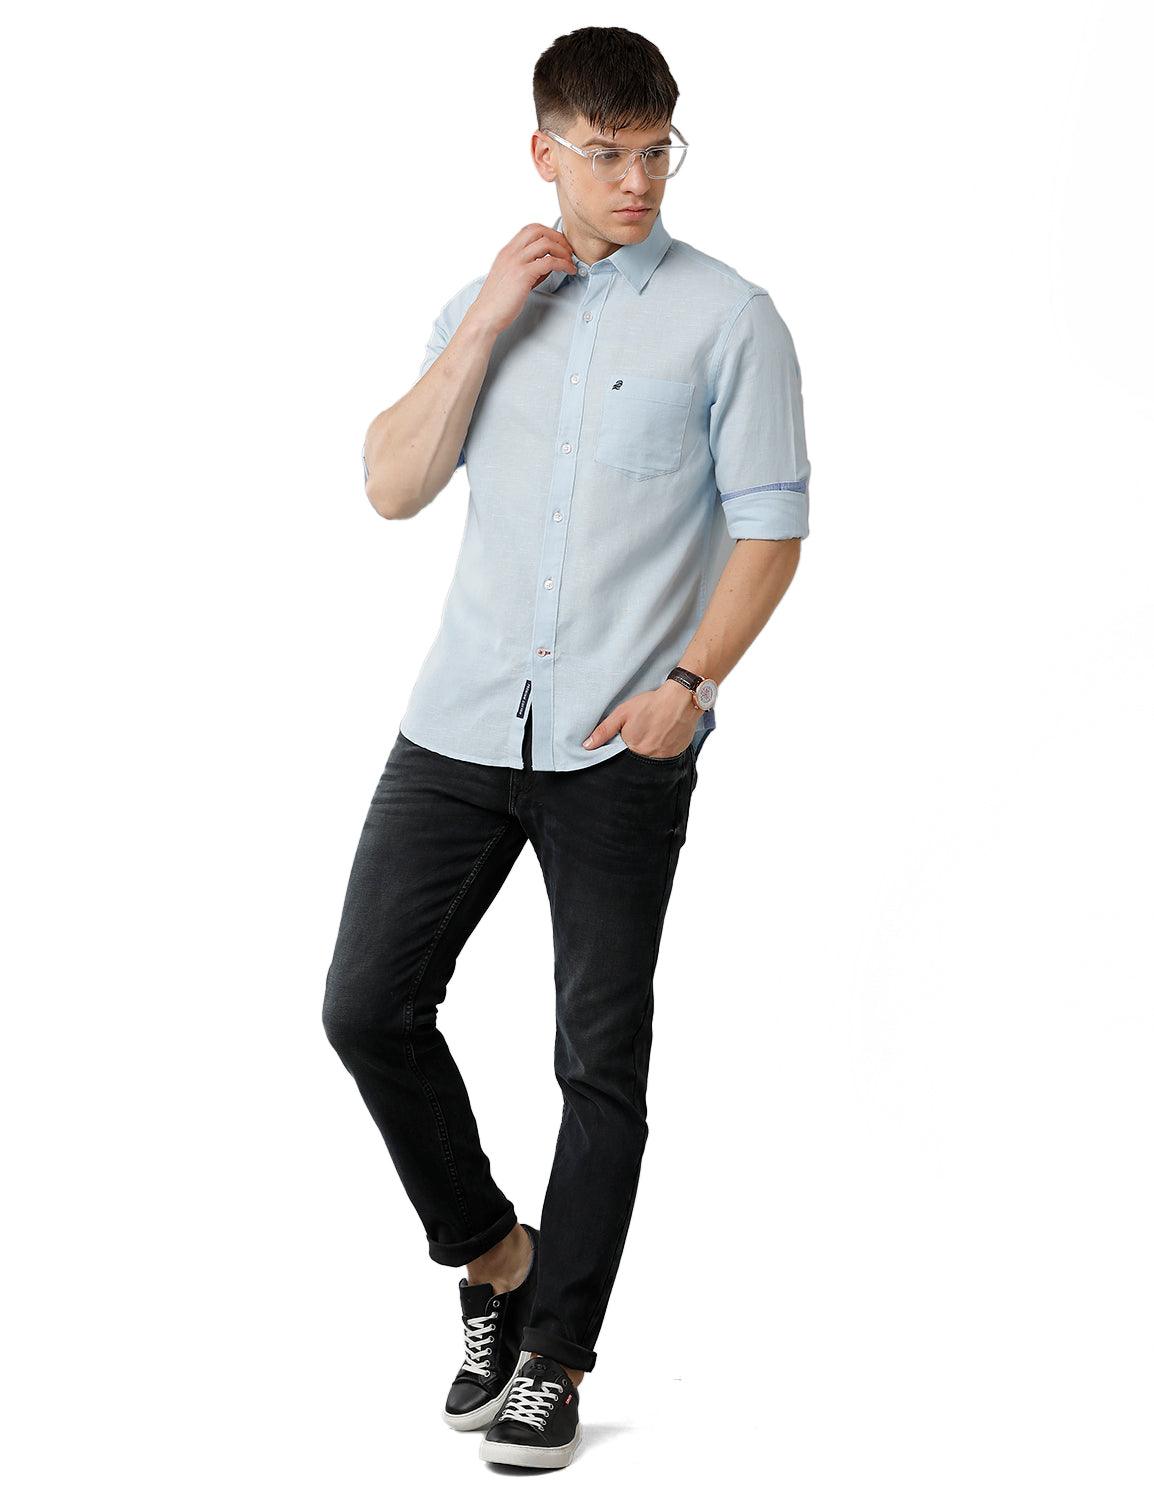 Light Blue Solid Casual Shirt - Double Two